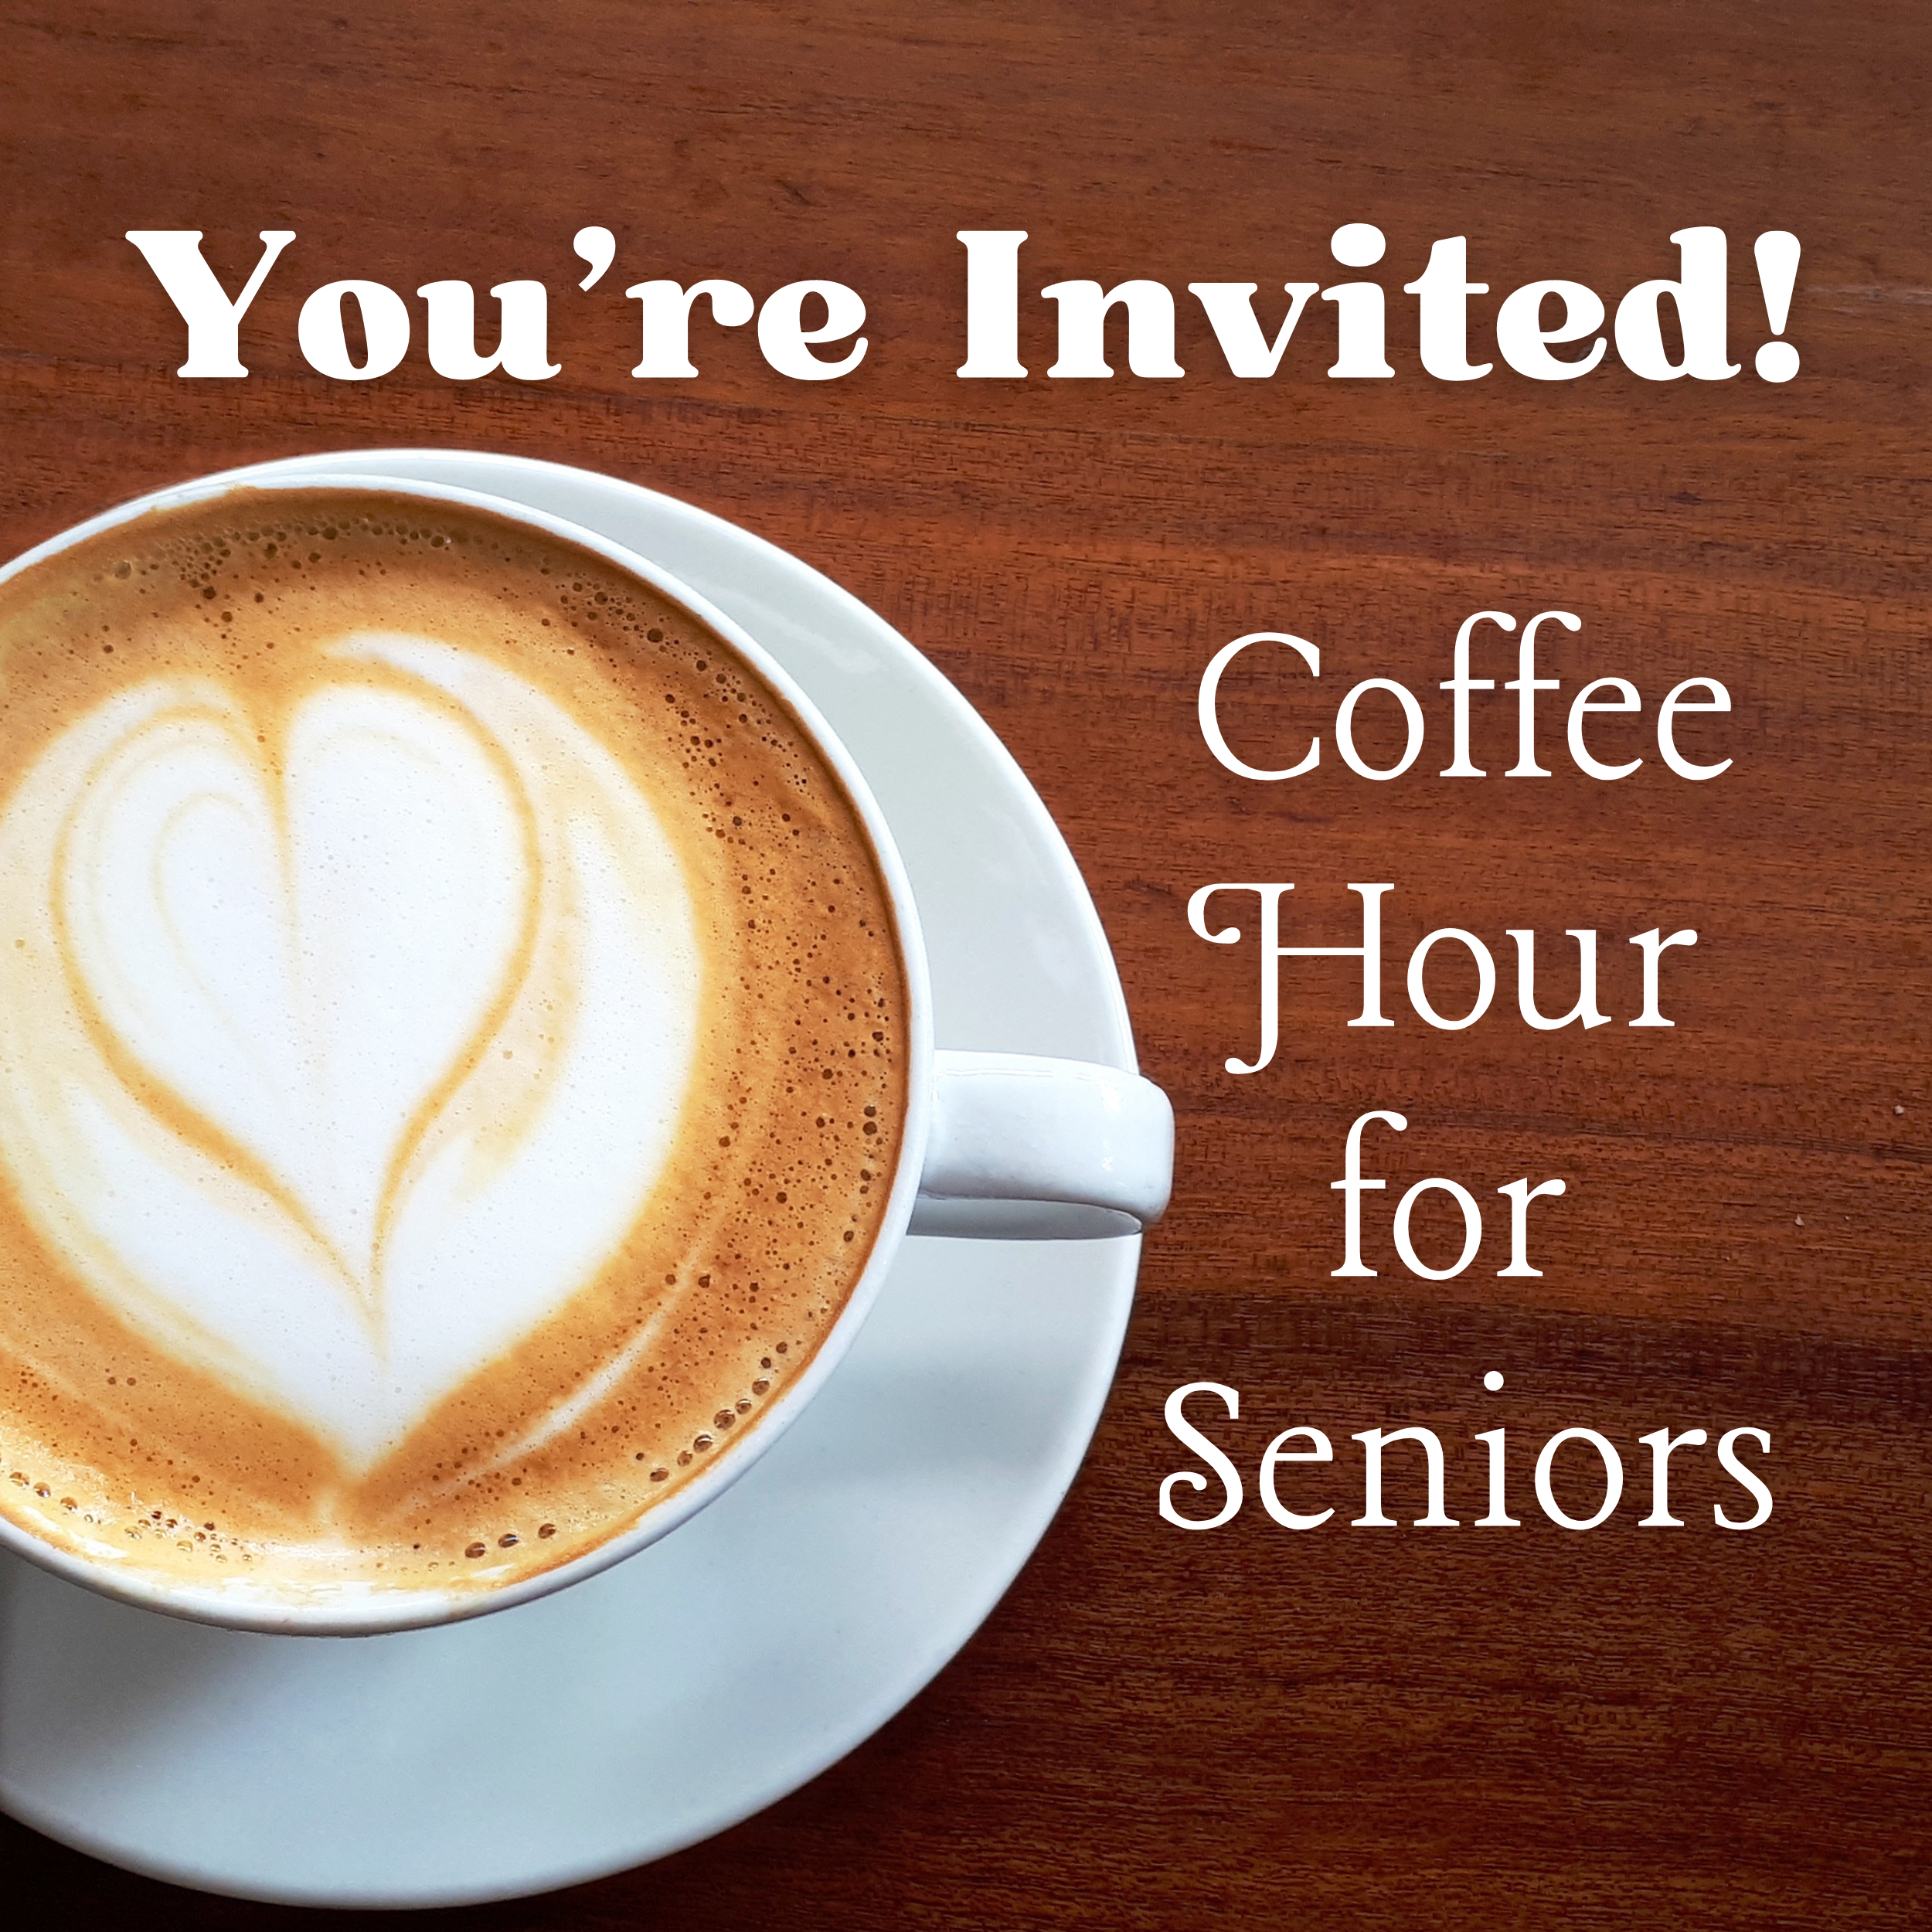 You're Invited! Coffee Hour for Seniors